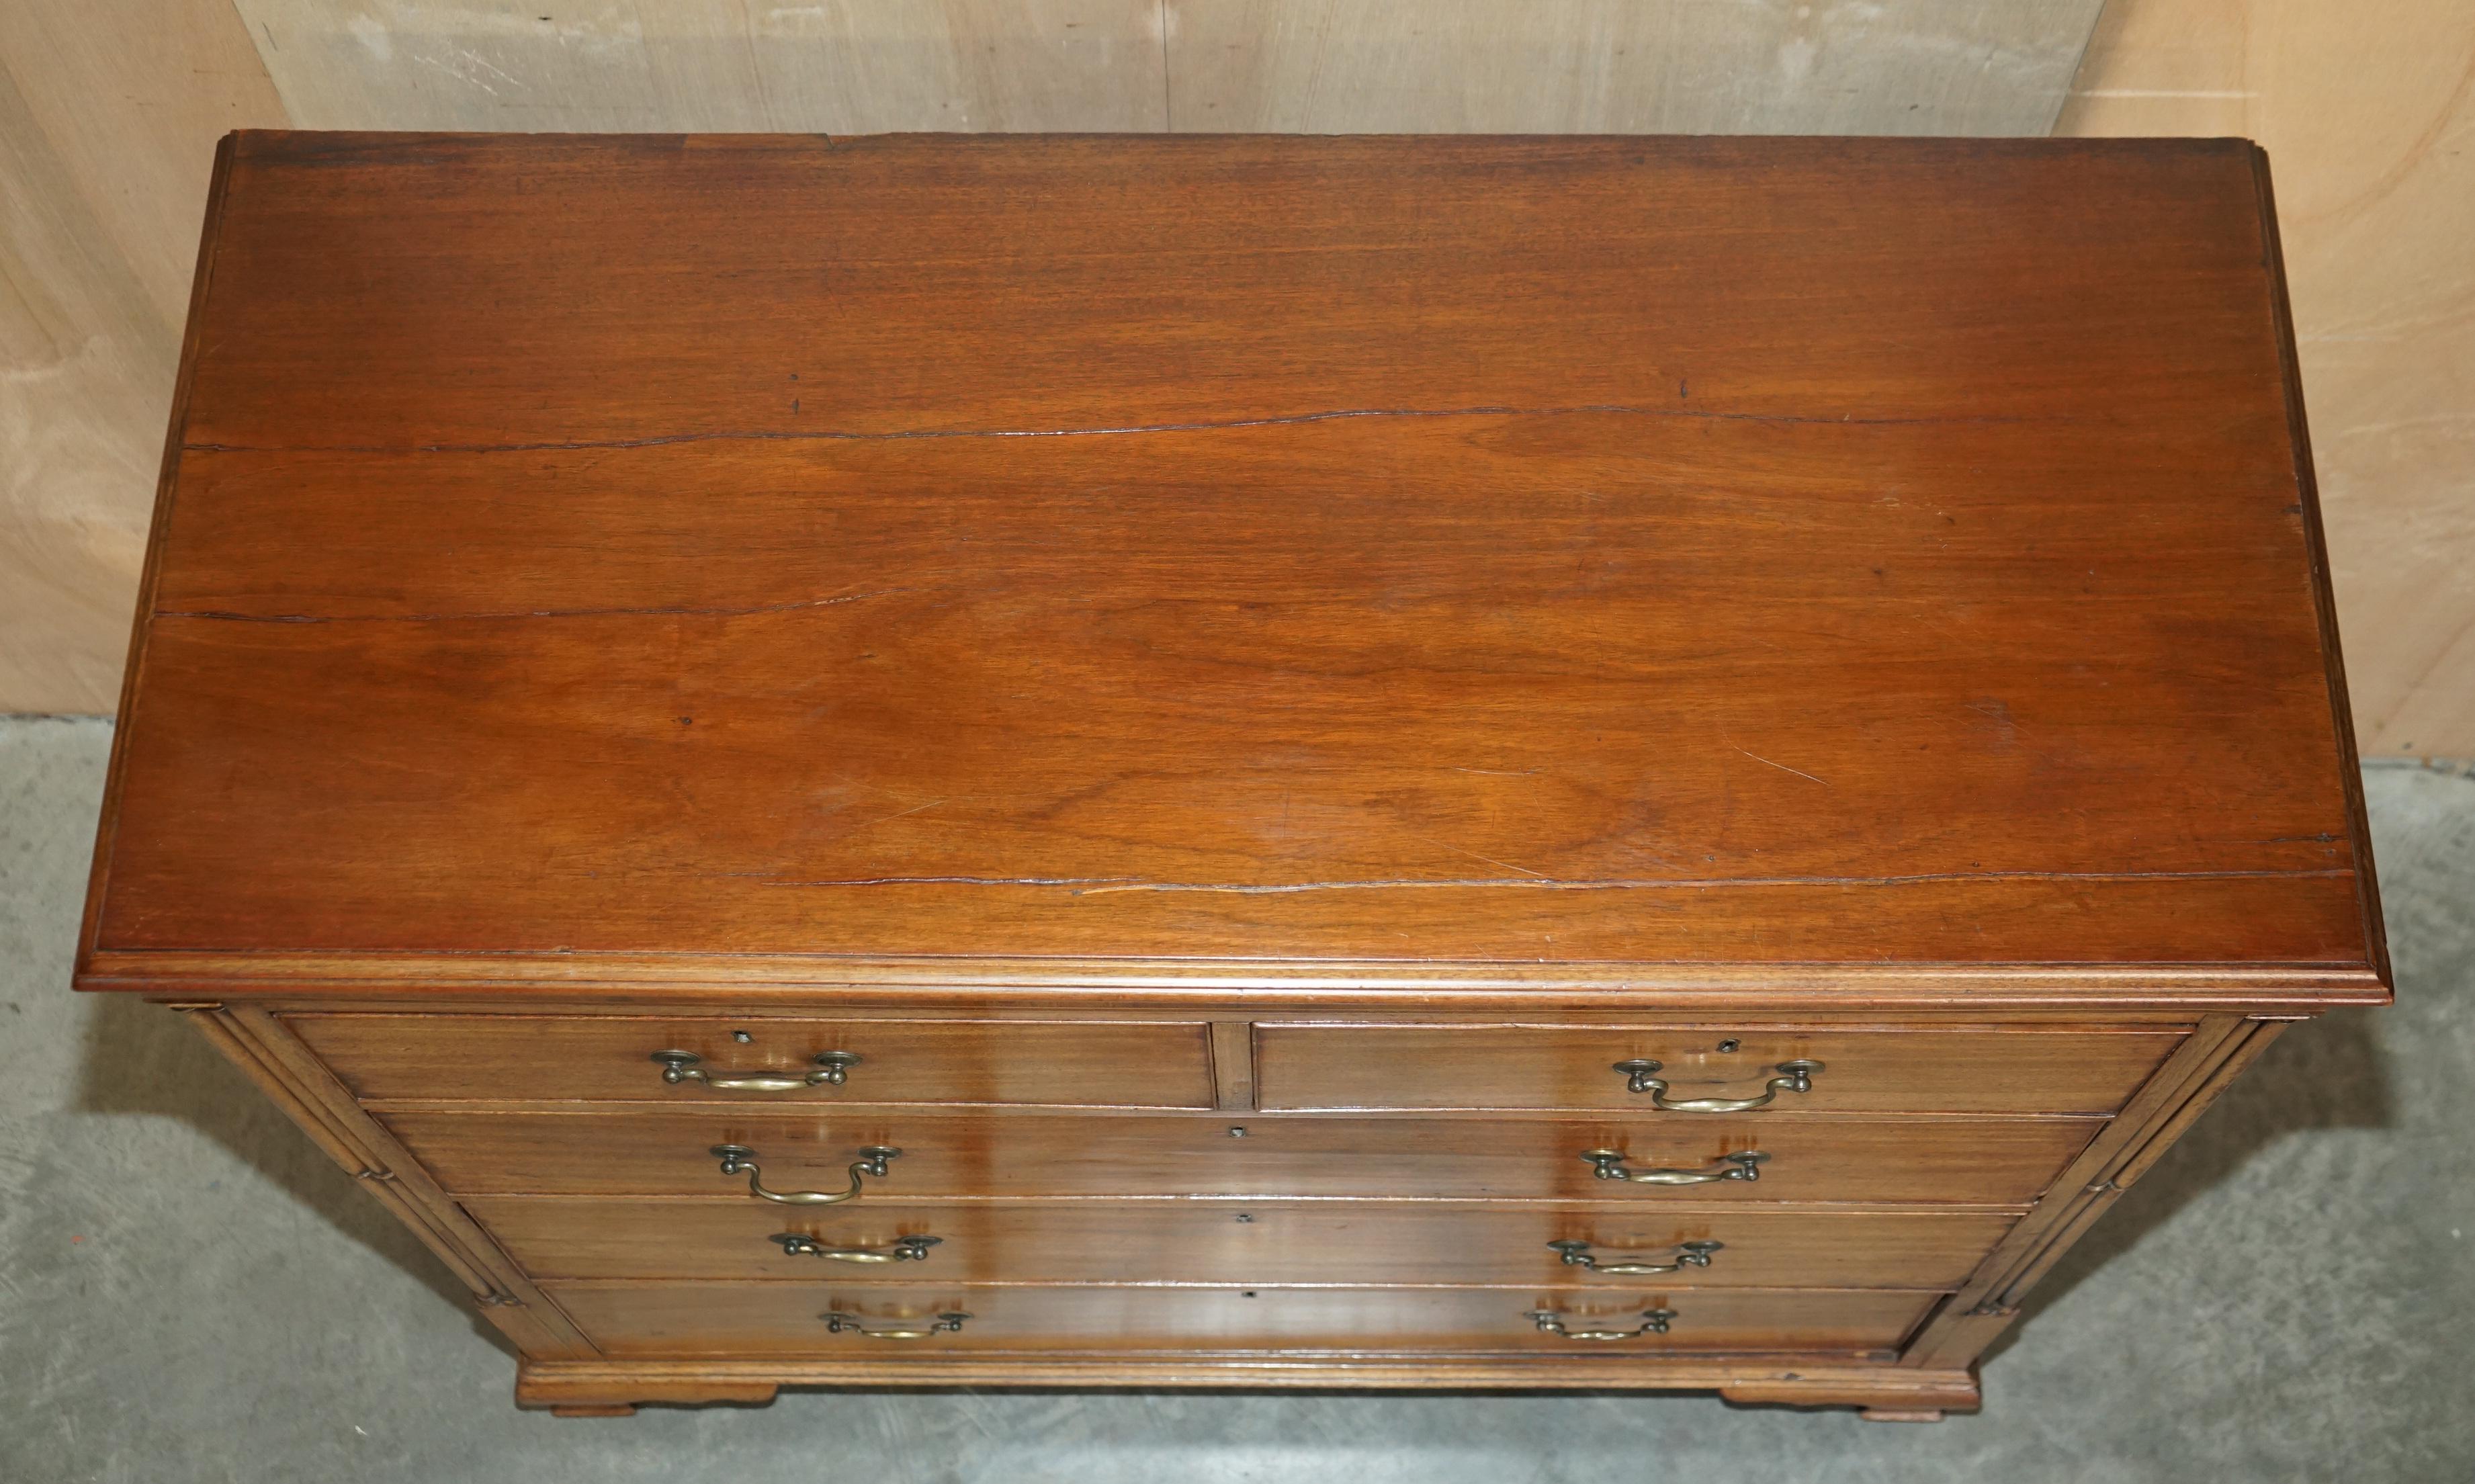 LARGE FiNE ANTIQUE THOMAS CHIPPENDALE SHERATON REVIVAL HARDWOOD CHEST OF DRAWERS im Angebot 6